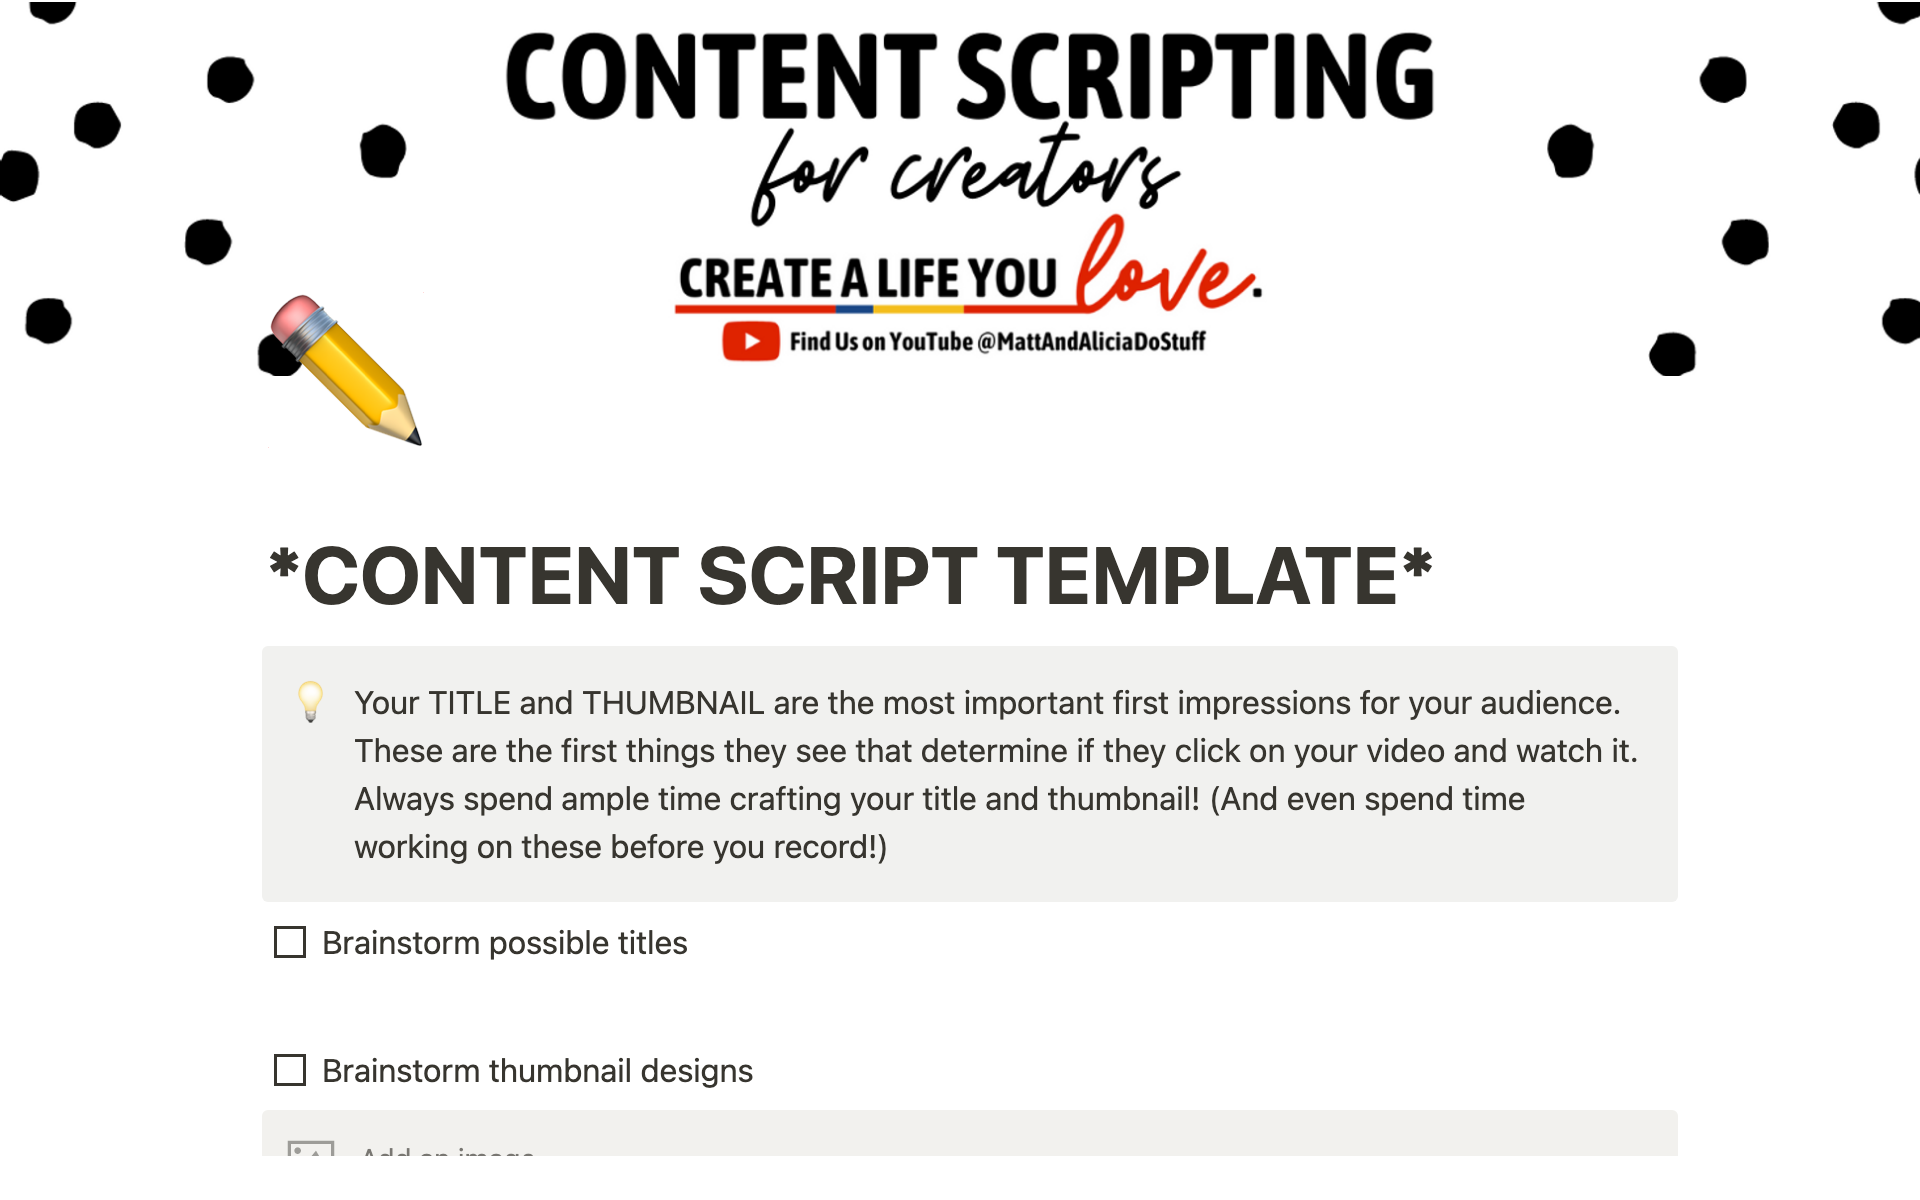 A template preview for Content Scripting for Creators